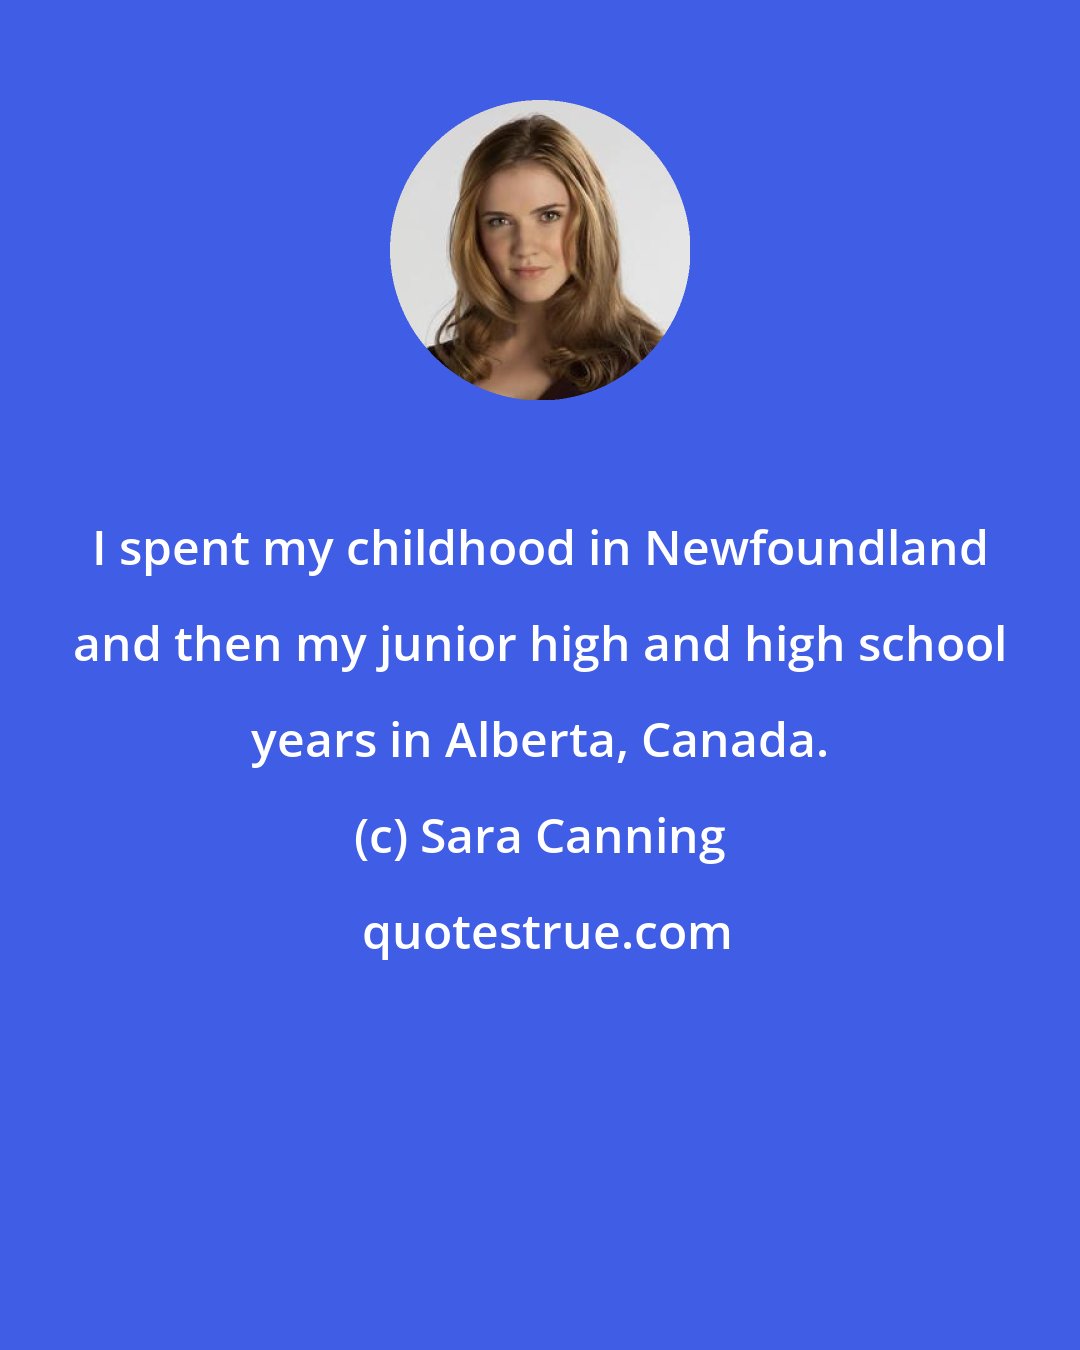 Sara Canning: I spent my childhood in Newfoundland and then my junior high and high school years in Alberta, Canada.